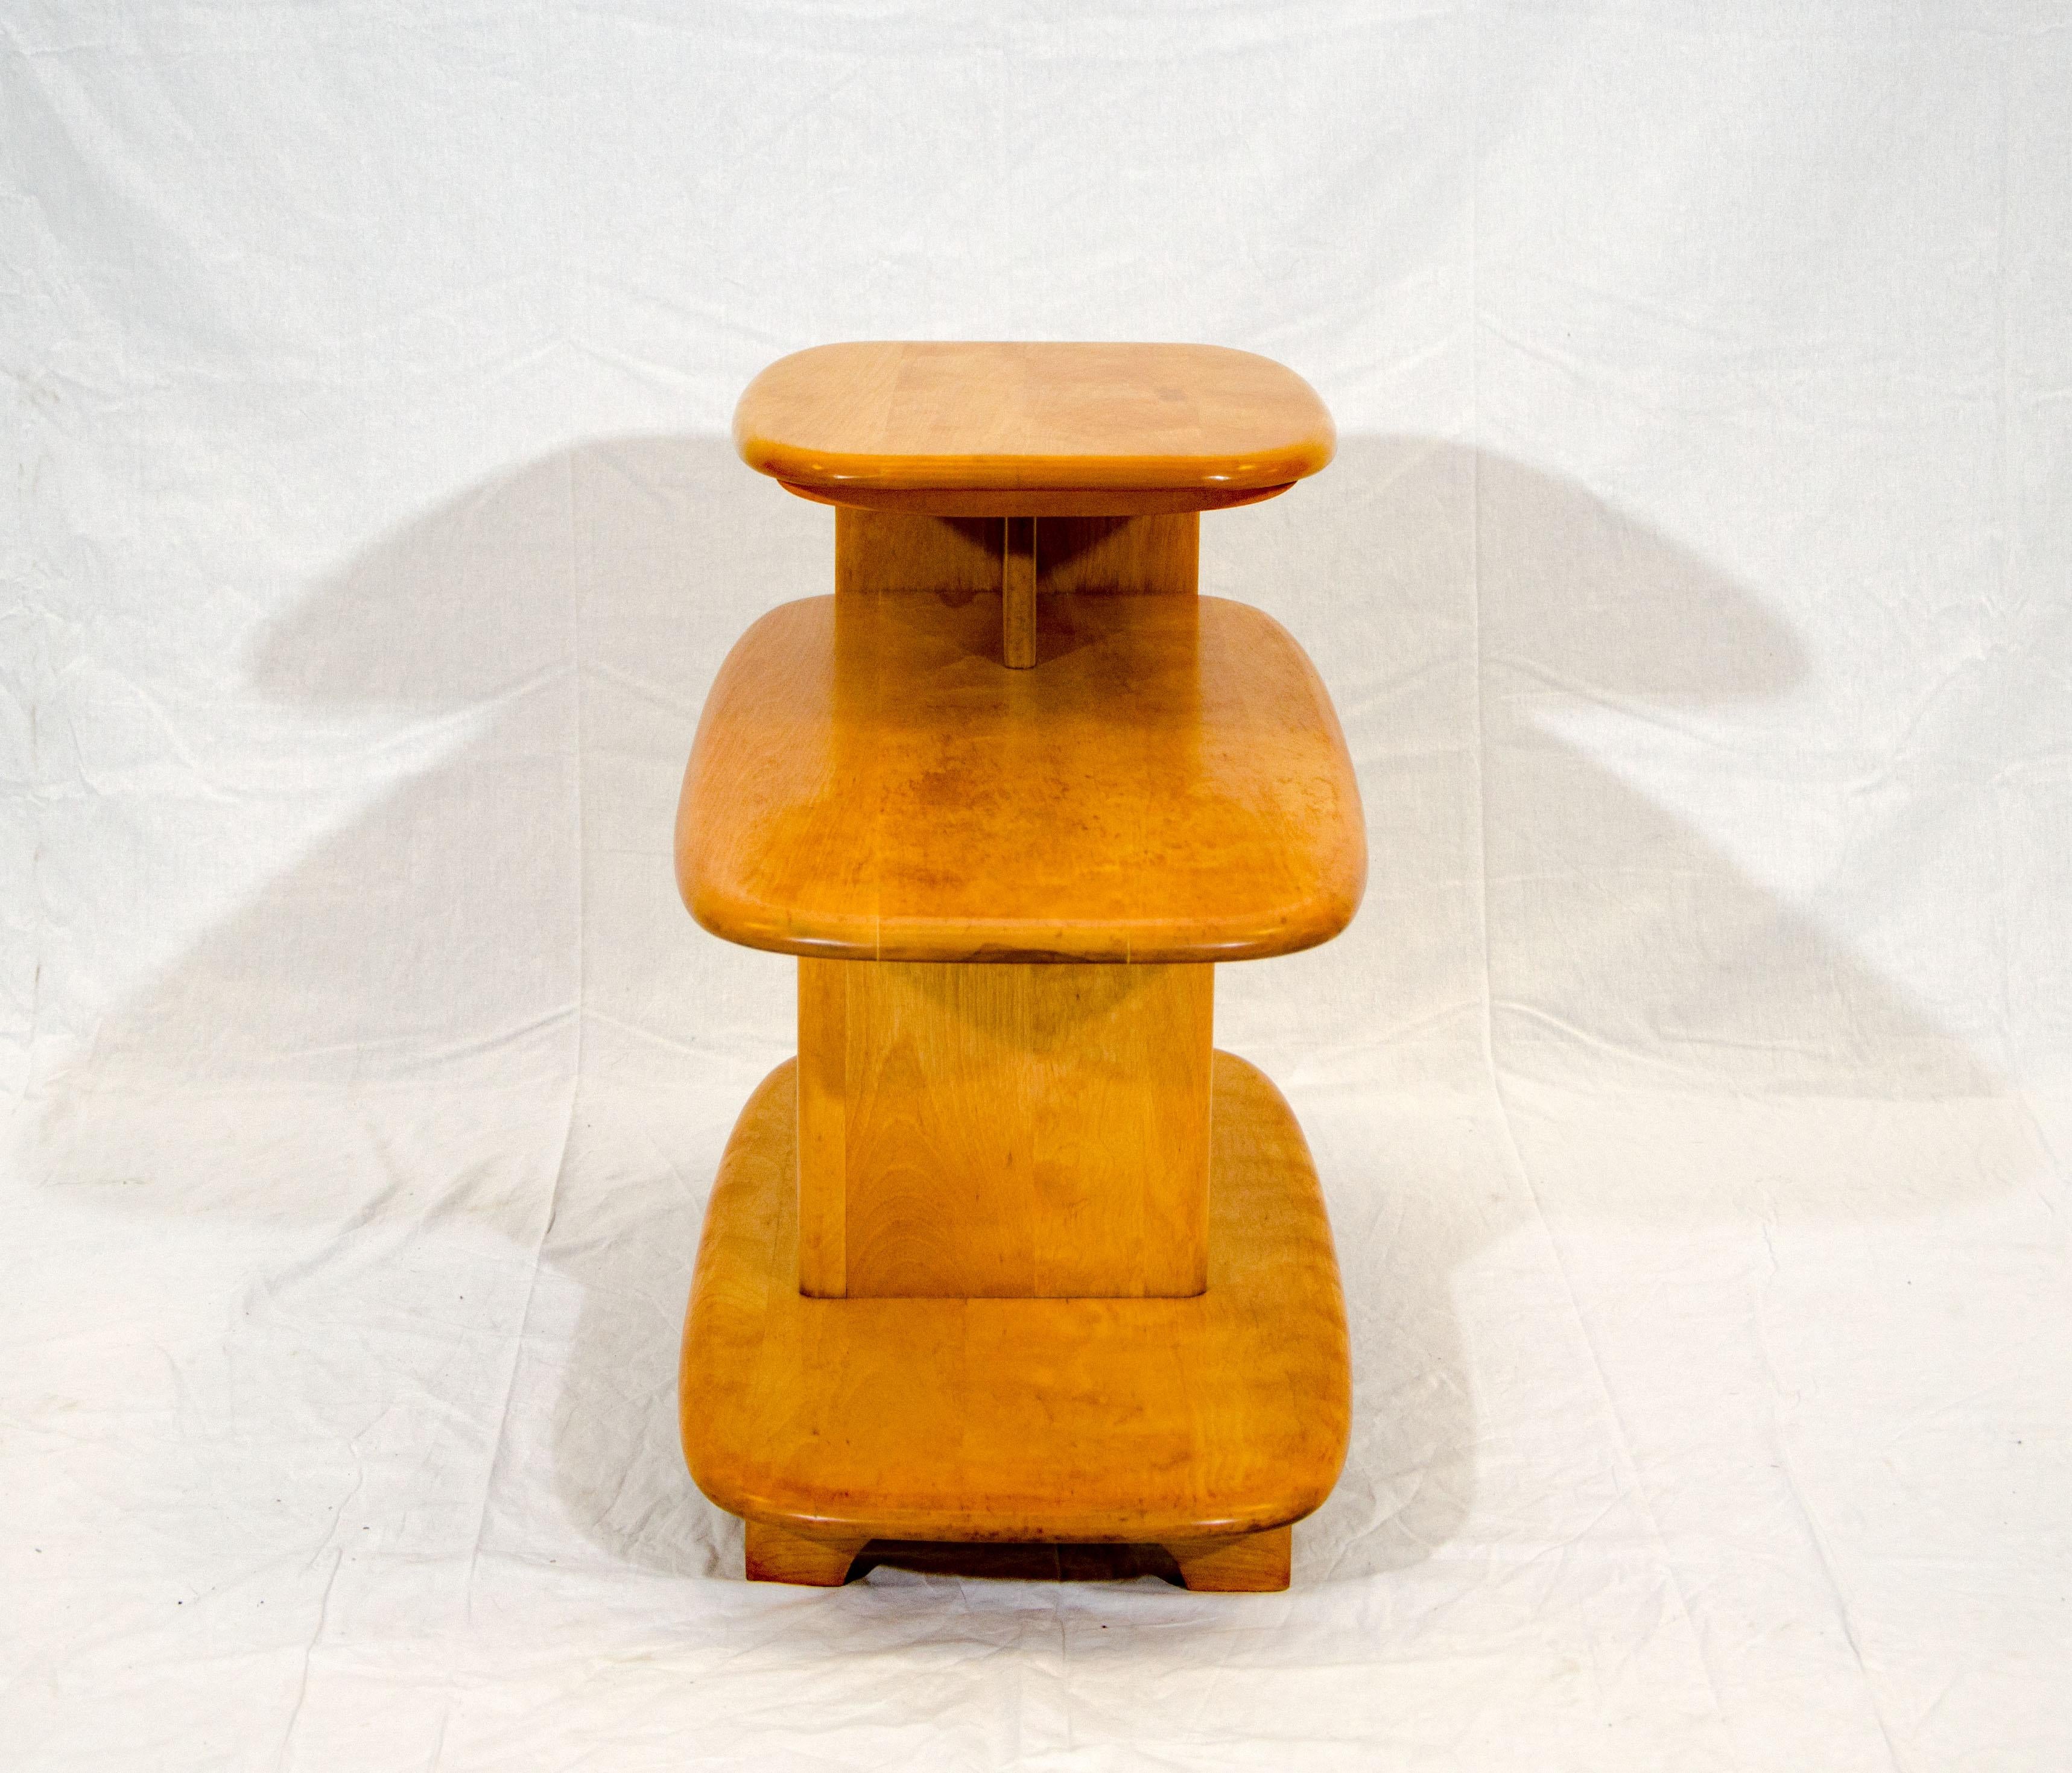 This iconic 3-tier Heywood Wakefield end table was first manufactured in the 1940s. It was discontinued and re-introduced for California production only on in the 1950s. The small top tier measures 14 1/2